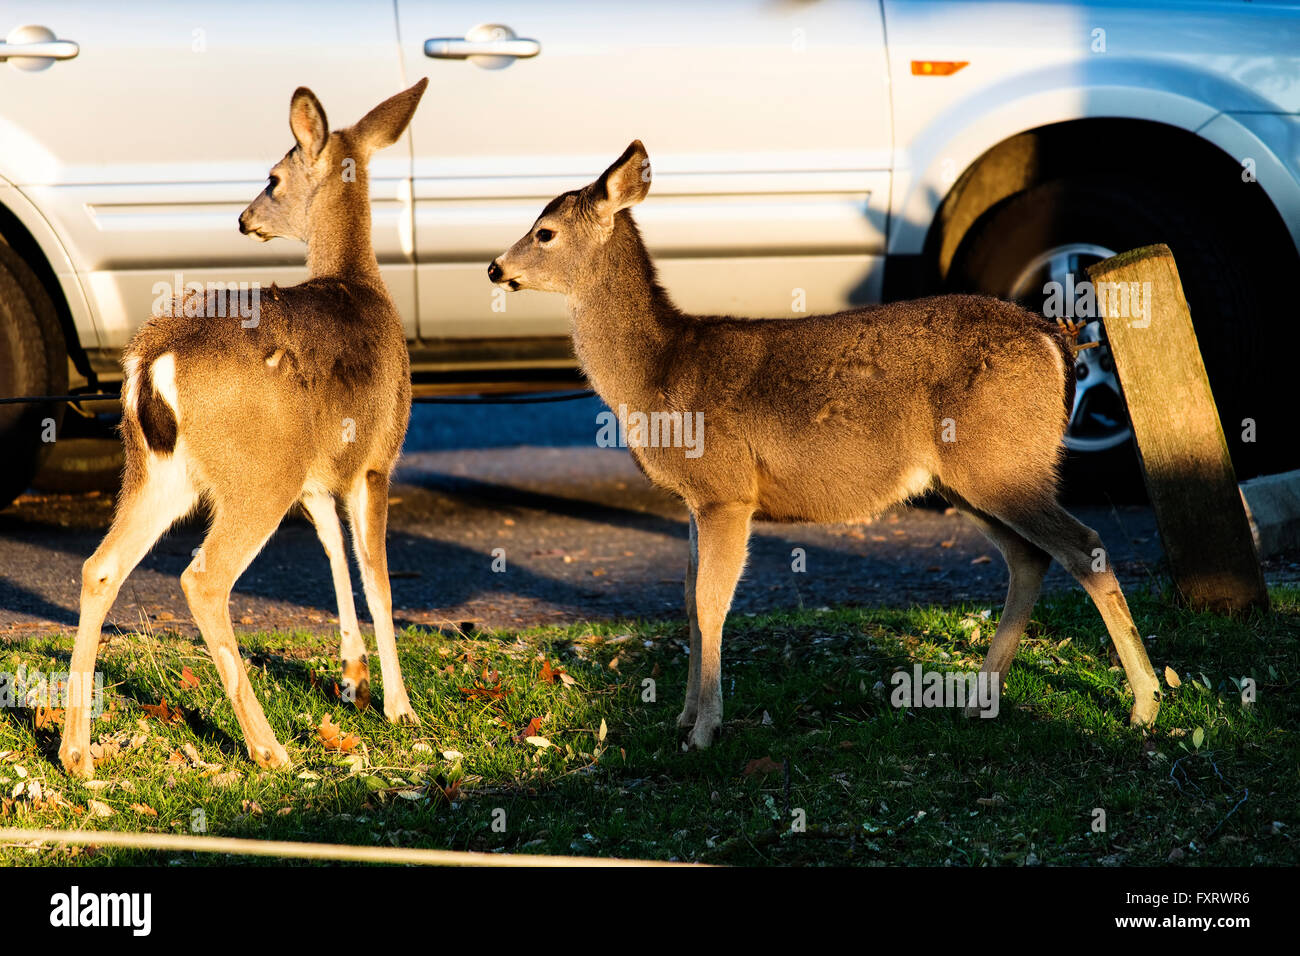 Two Young Deer Standing On Grass In Parking Lot Stock Photo